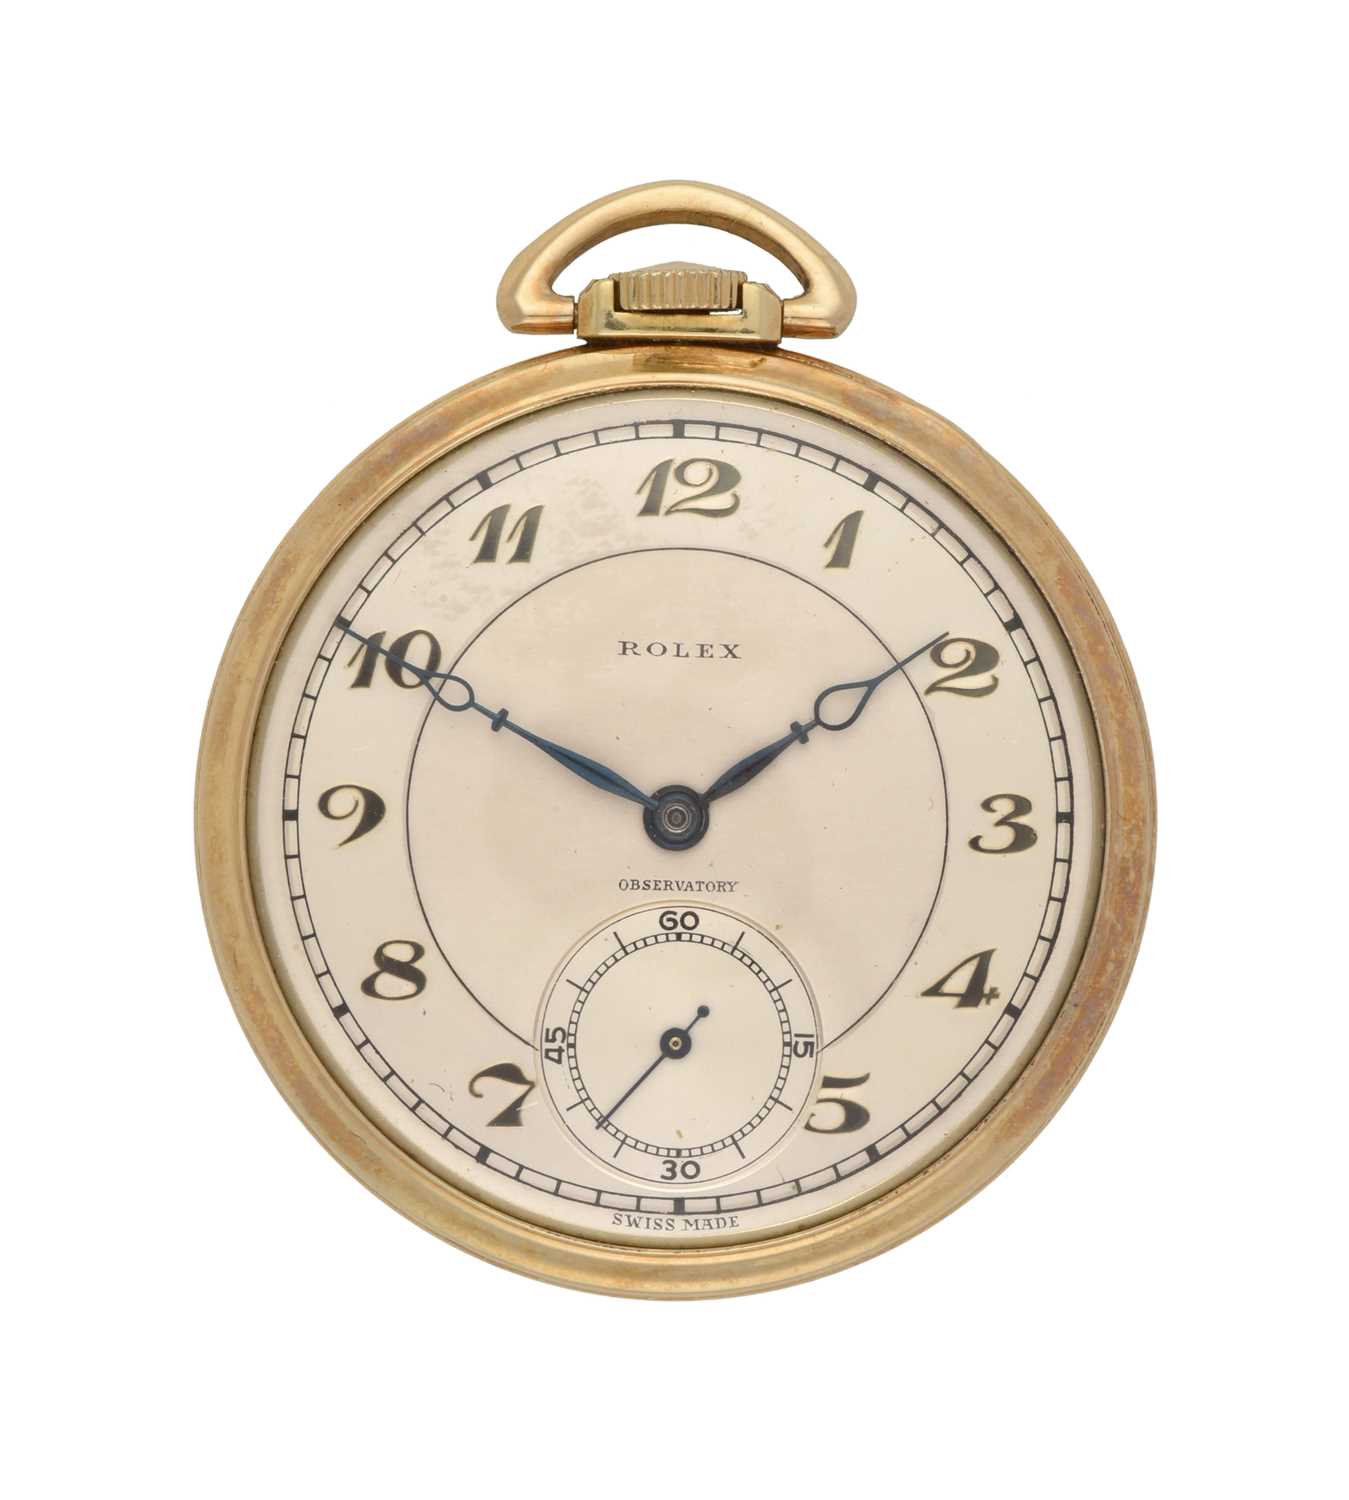 Rolex: A Rare Art Deco Observatory Quality Open Faced Pocket Watch signed Rolex, Observatory, circa